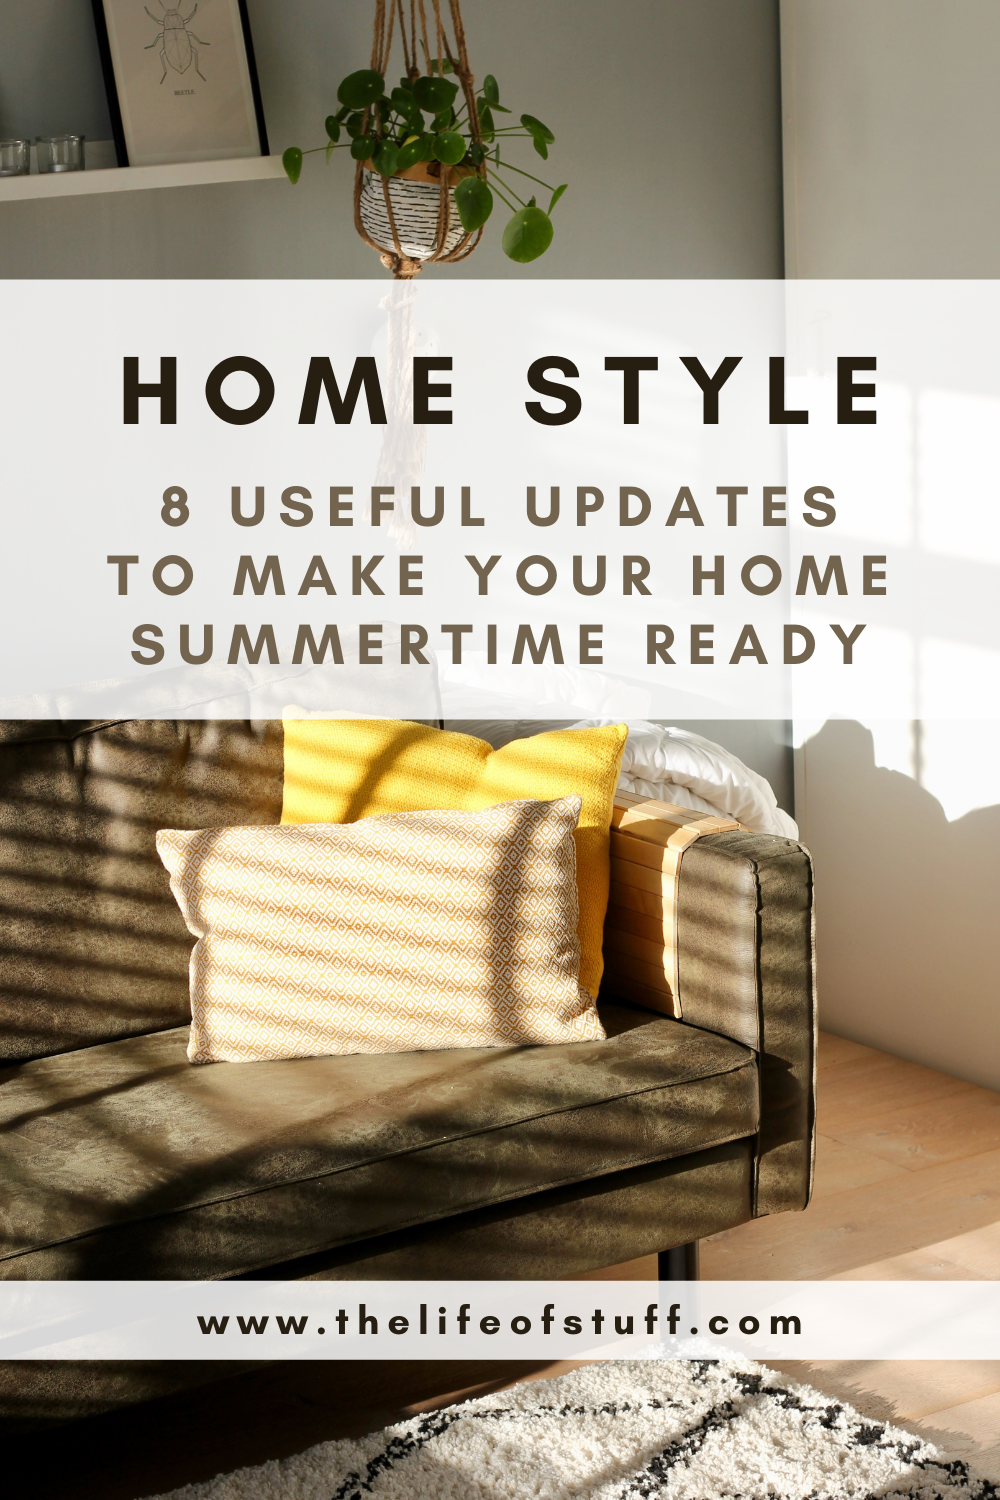 8 Useful Updates To Make Your Home Summertime Ready - The Life of Stuff